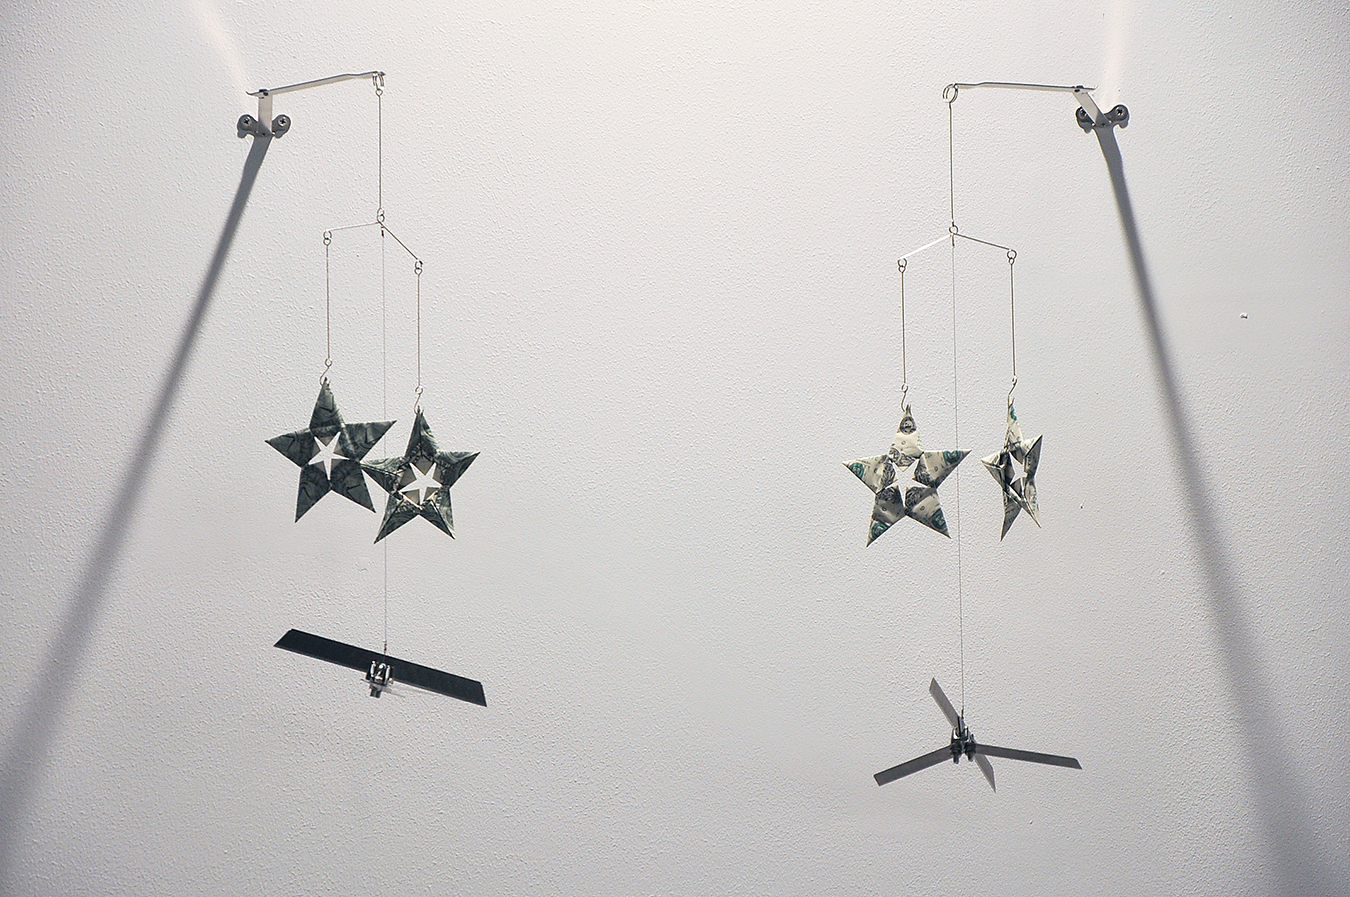   Twinkle Twinkle Little Drone  - Mobile series, Altered toy mobile, banknotes, stainless steel, plastic and metal wire, various sizes,&nbsp;Installation dimensions variable 